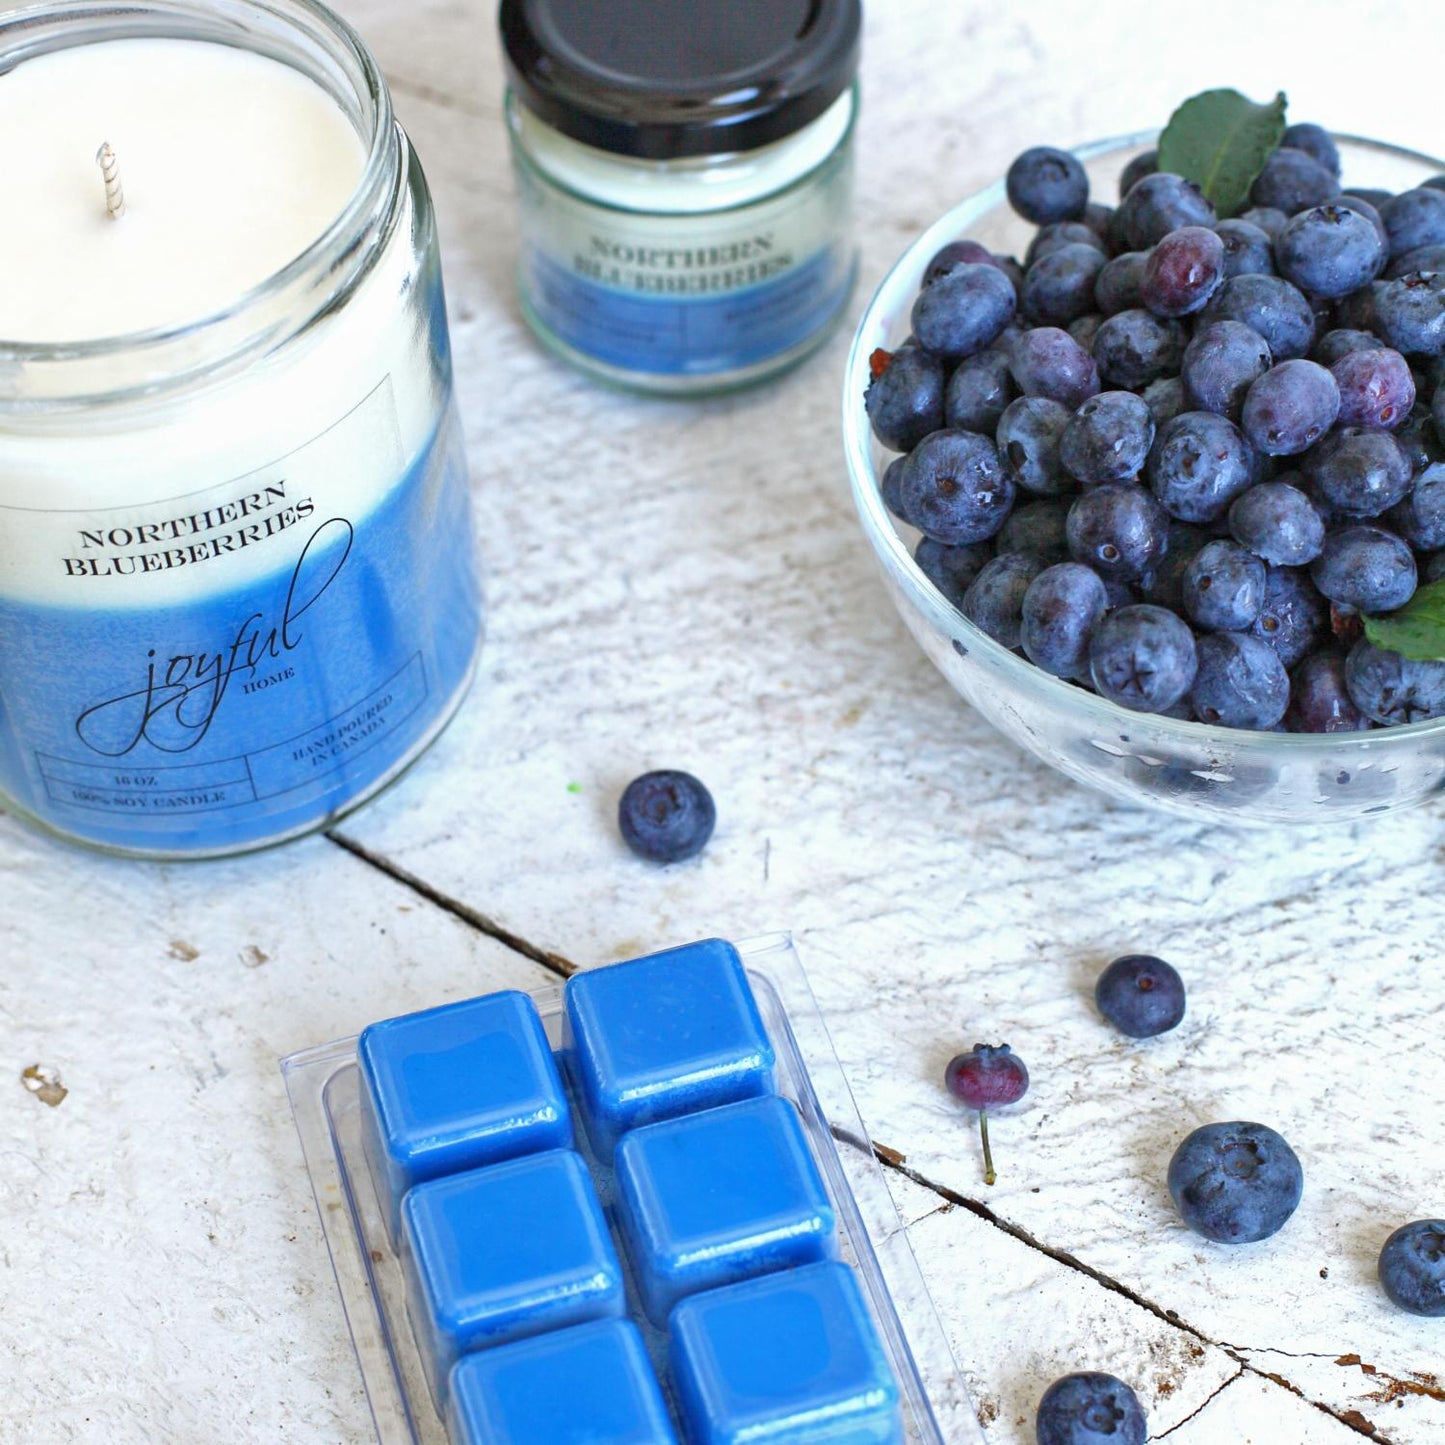 Northern Blueberry Soy Candle - Joyful Home Inc.